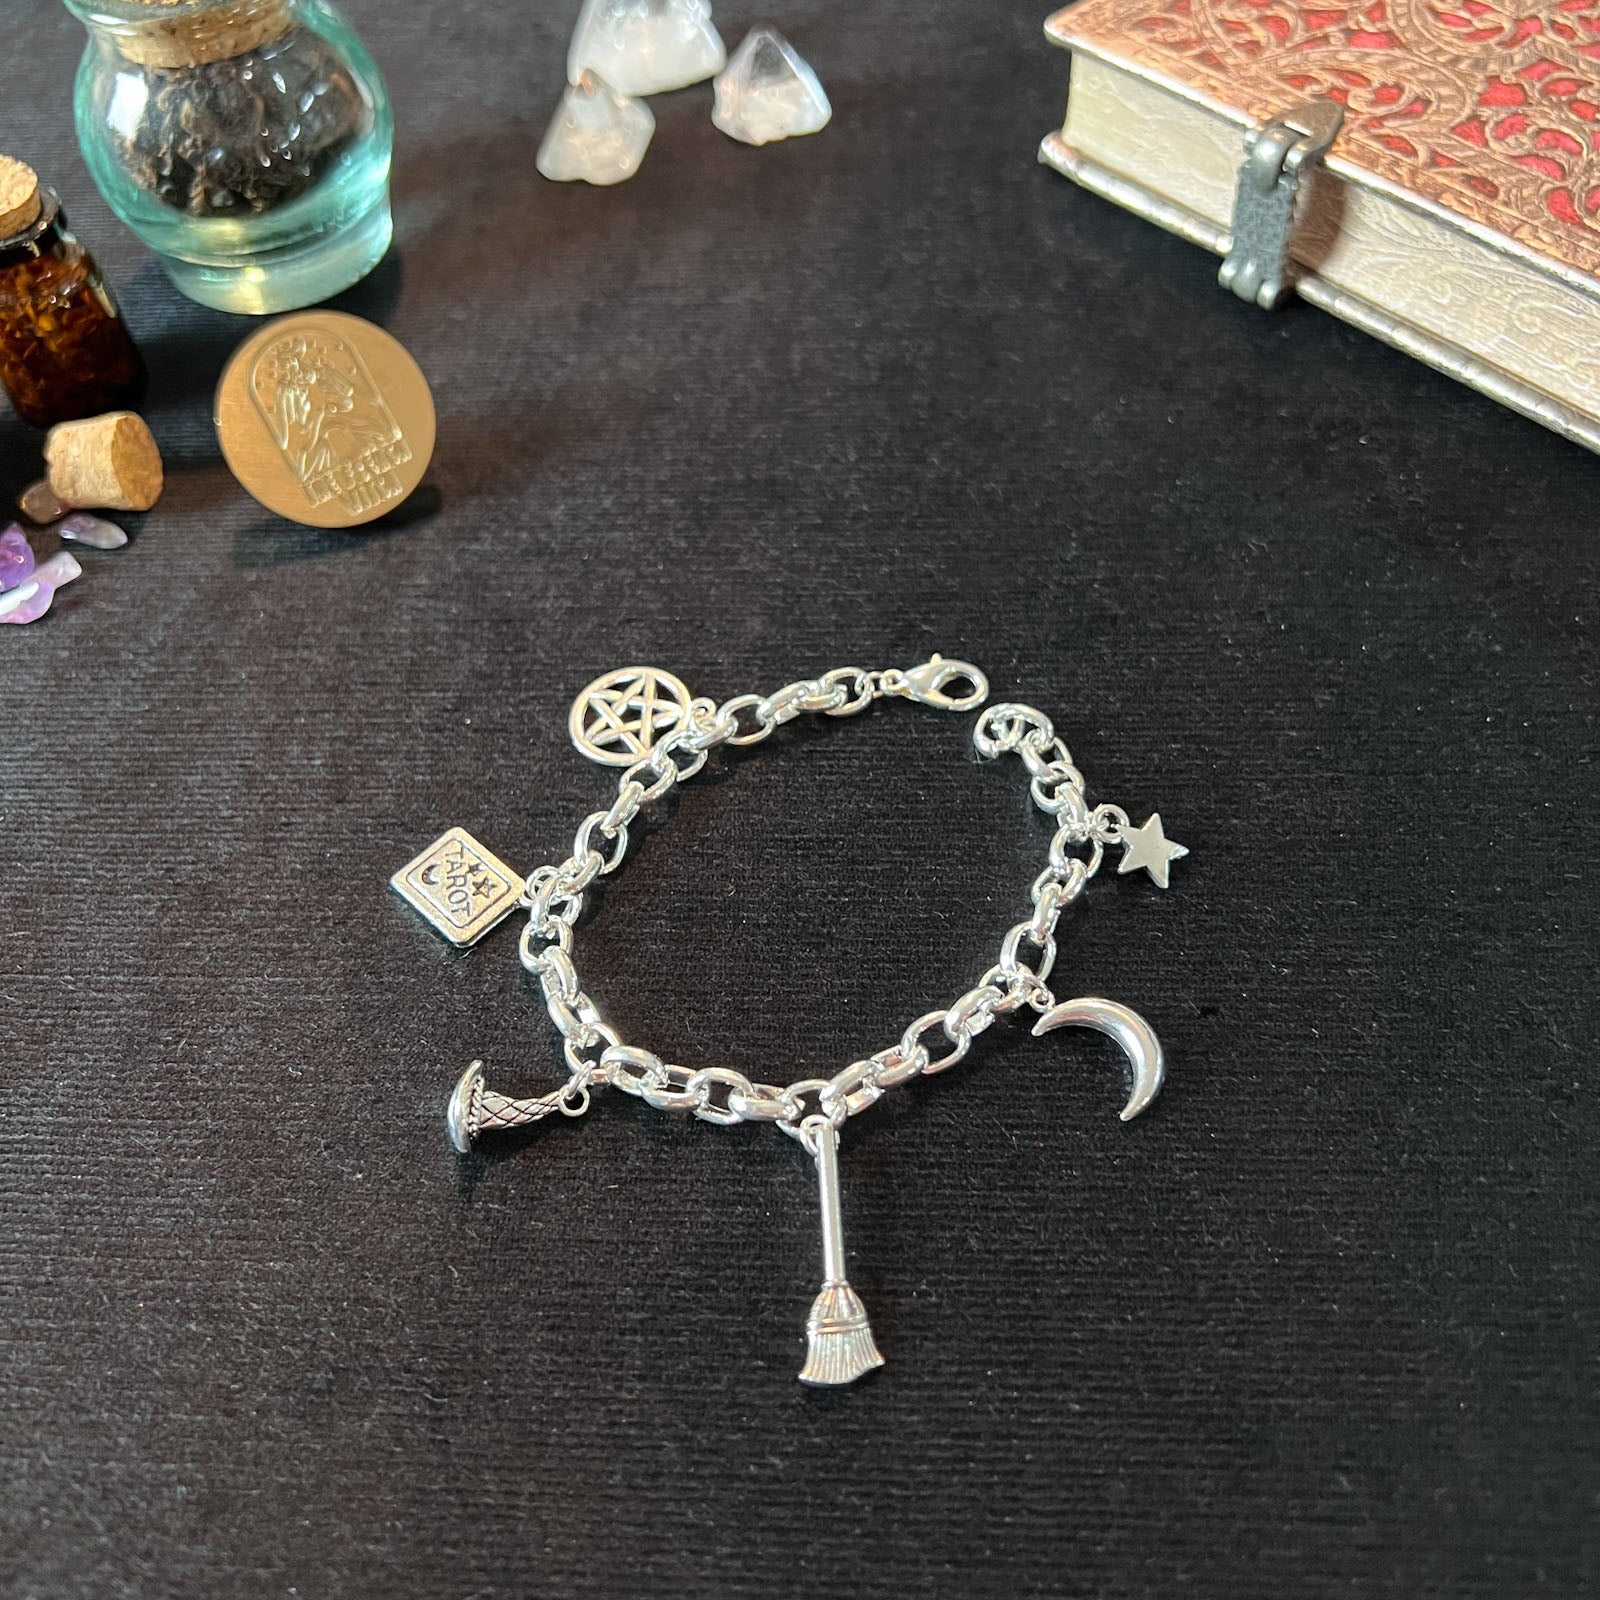 Witch charm bracelet witchcraft jewelry pagan wiccan spiritual symbols occult gothic spiritual gift for her